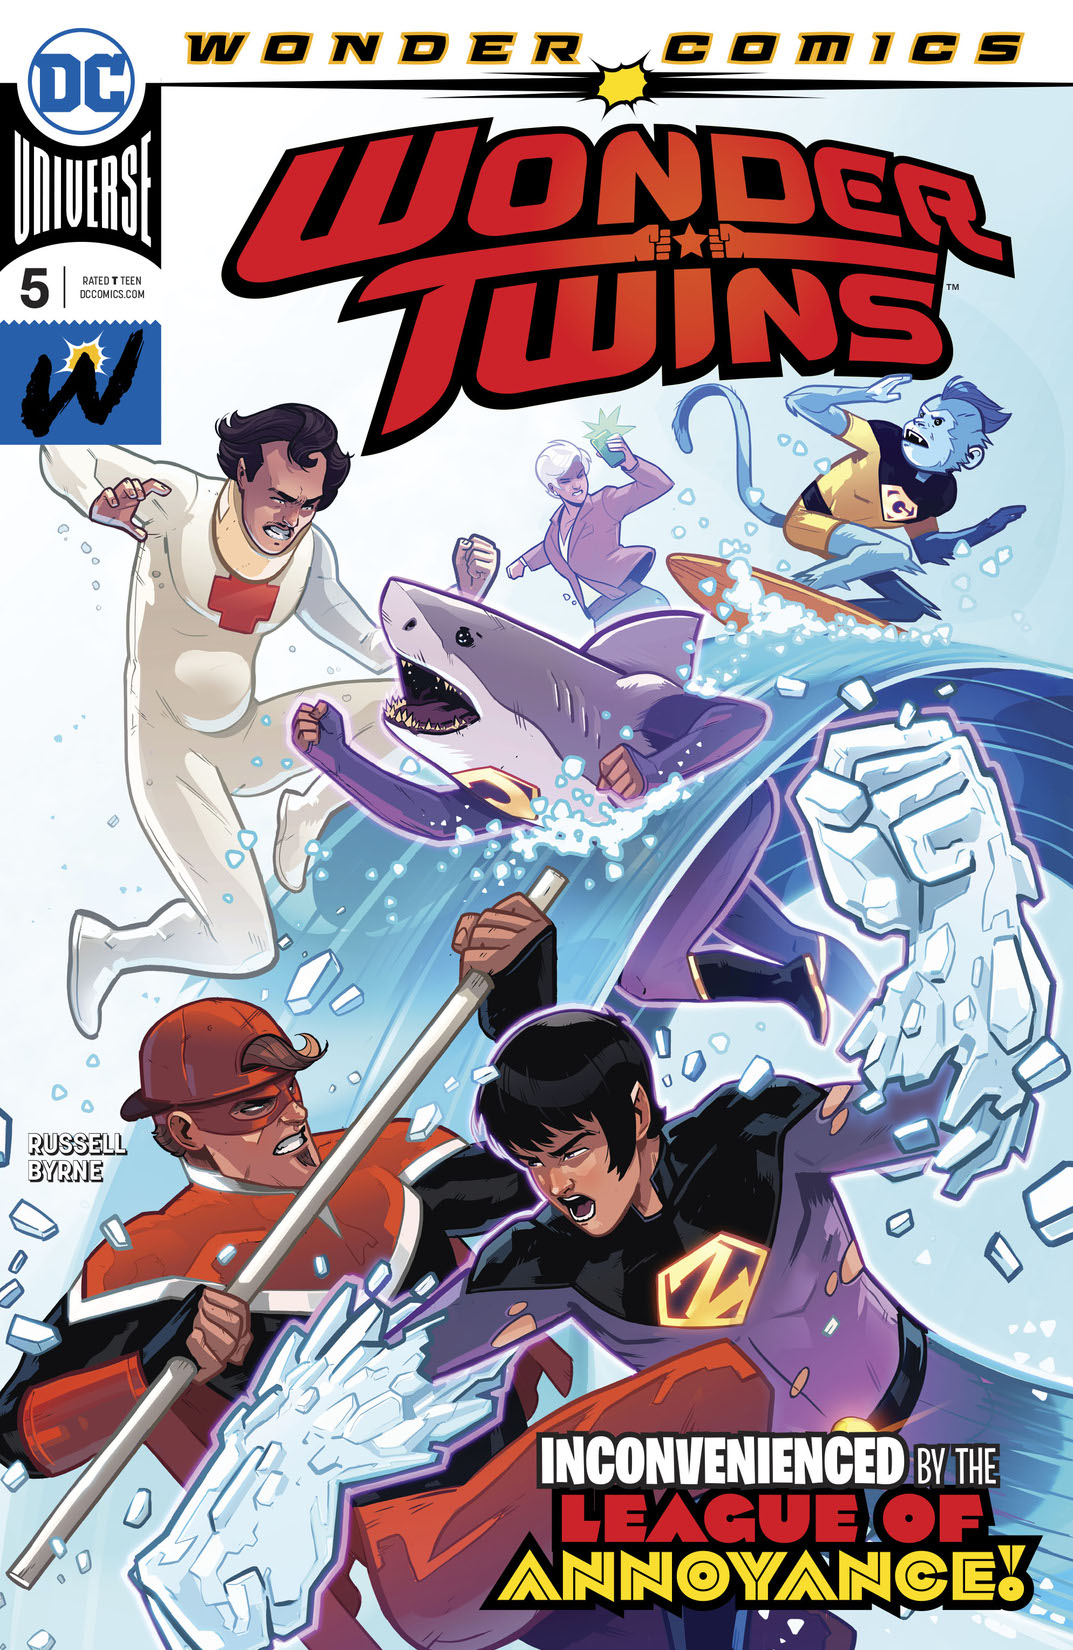 Wonder Twins #5 preview images